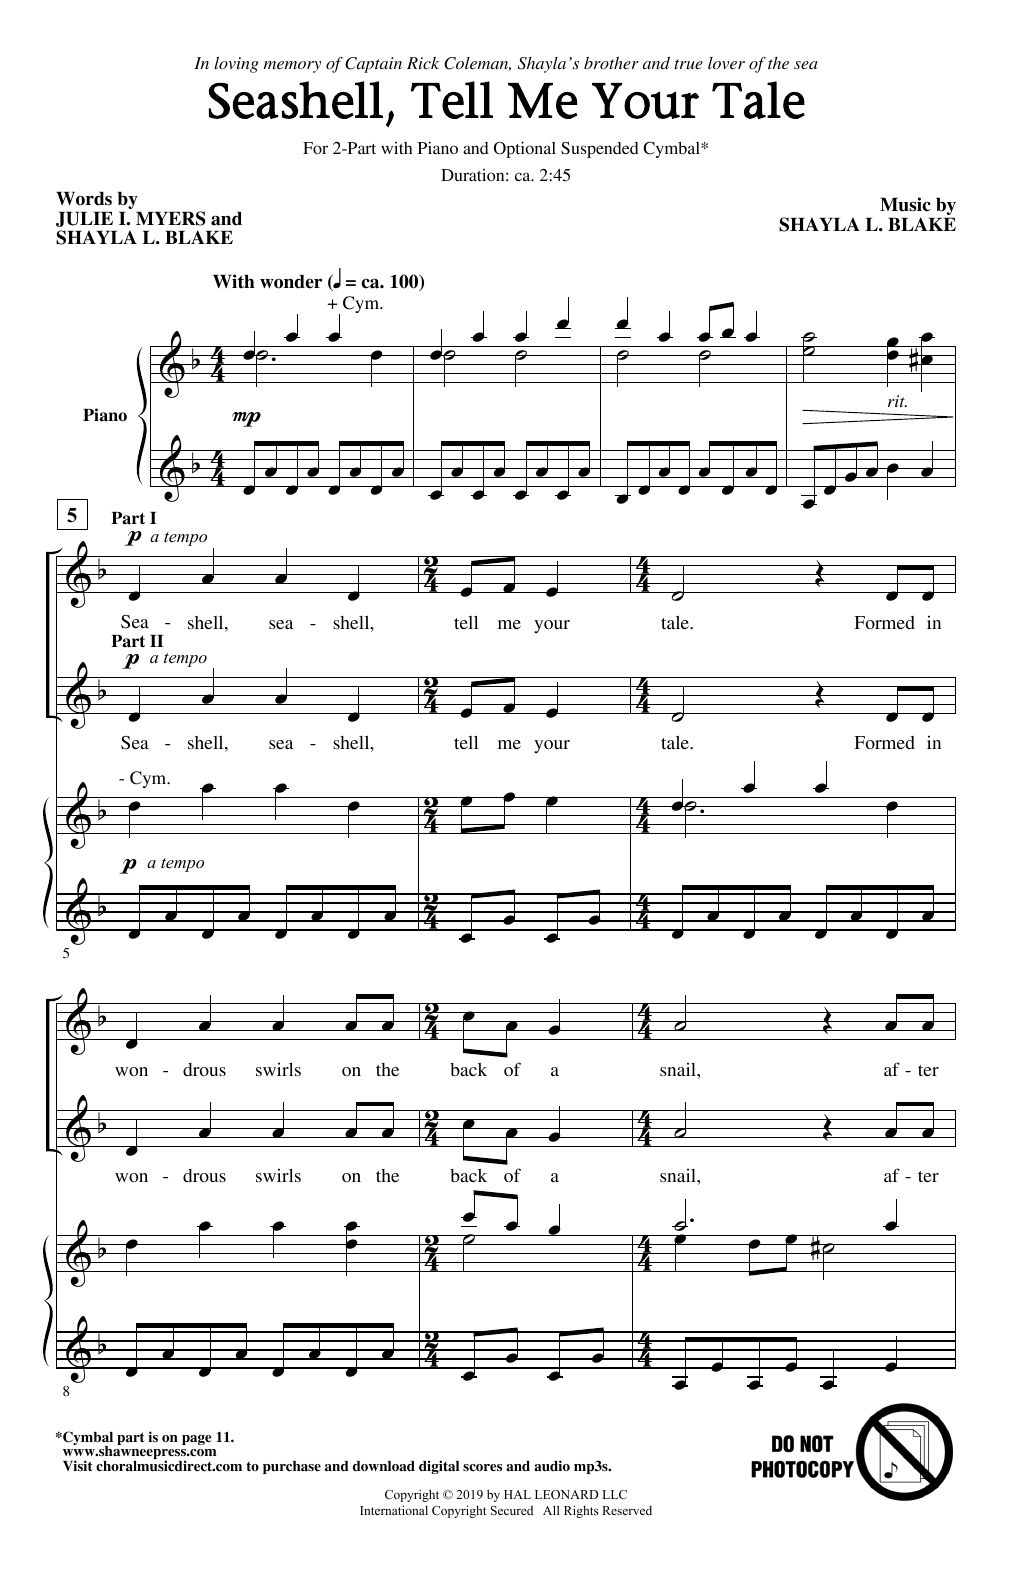 Download Julie I. Myers and Shayla L. Blake Seashell, Tell Me Your Tale Sheet Music